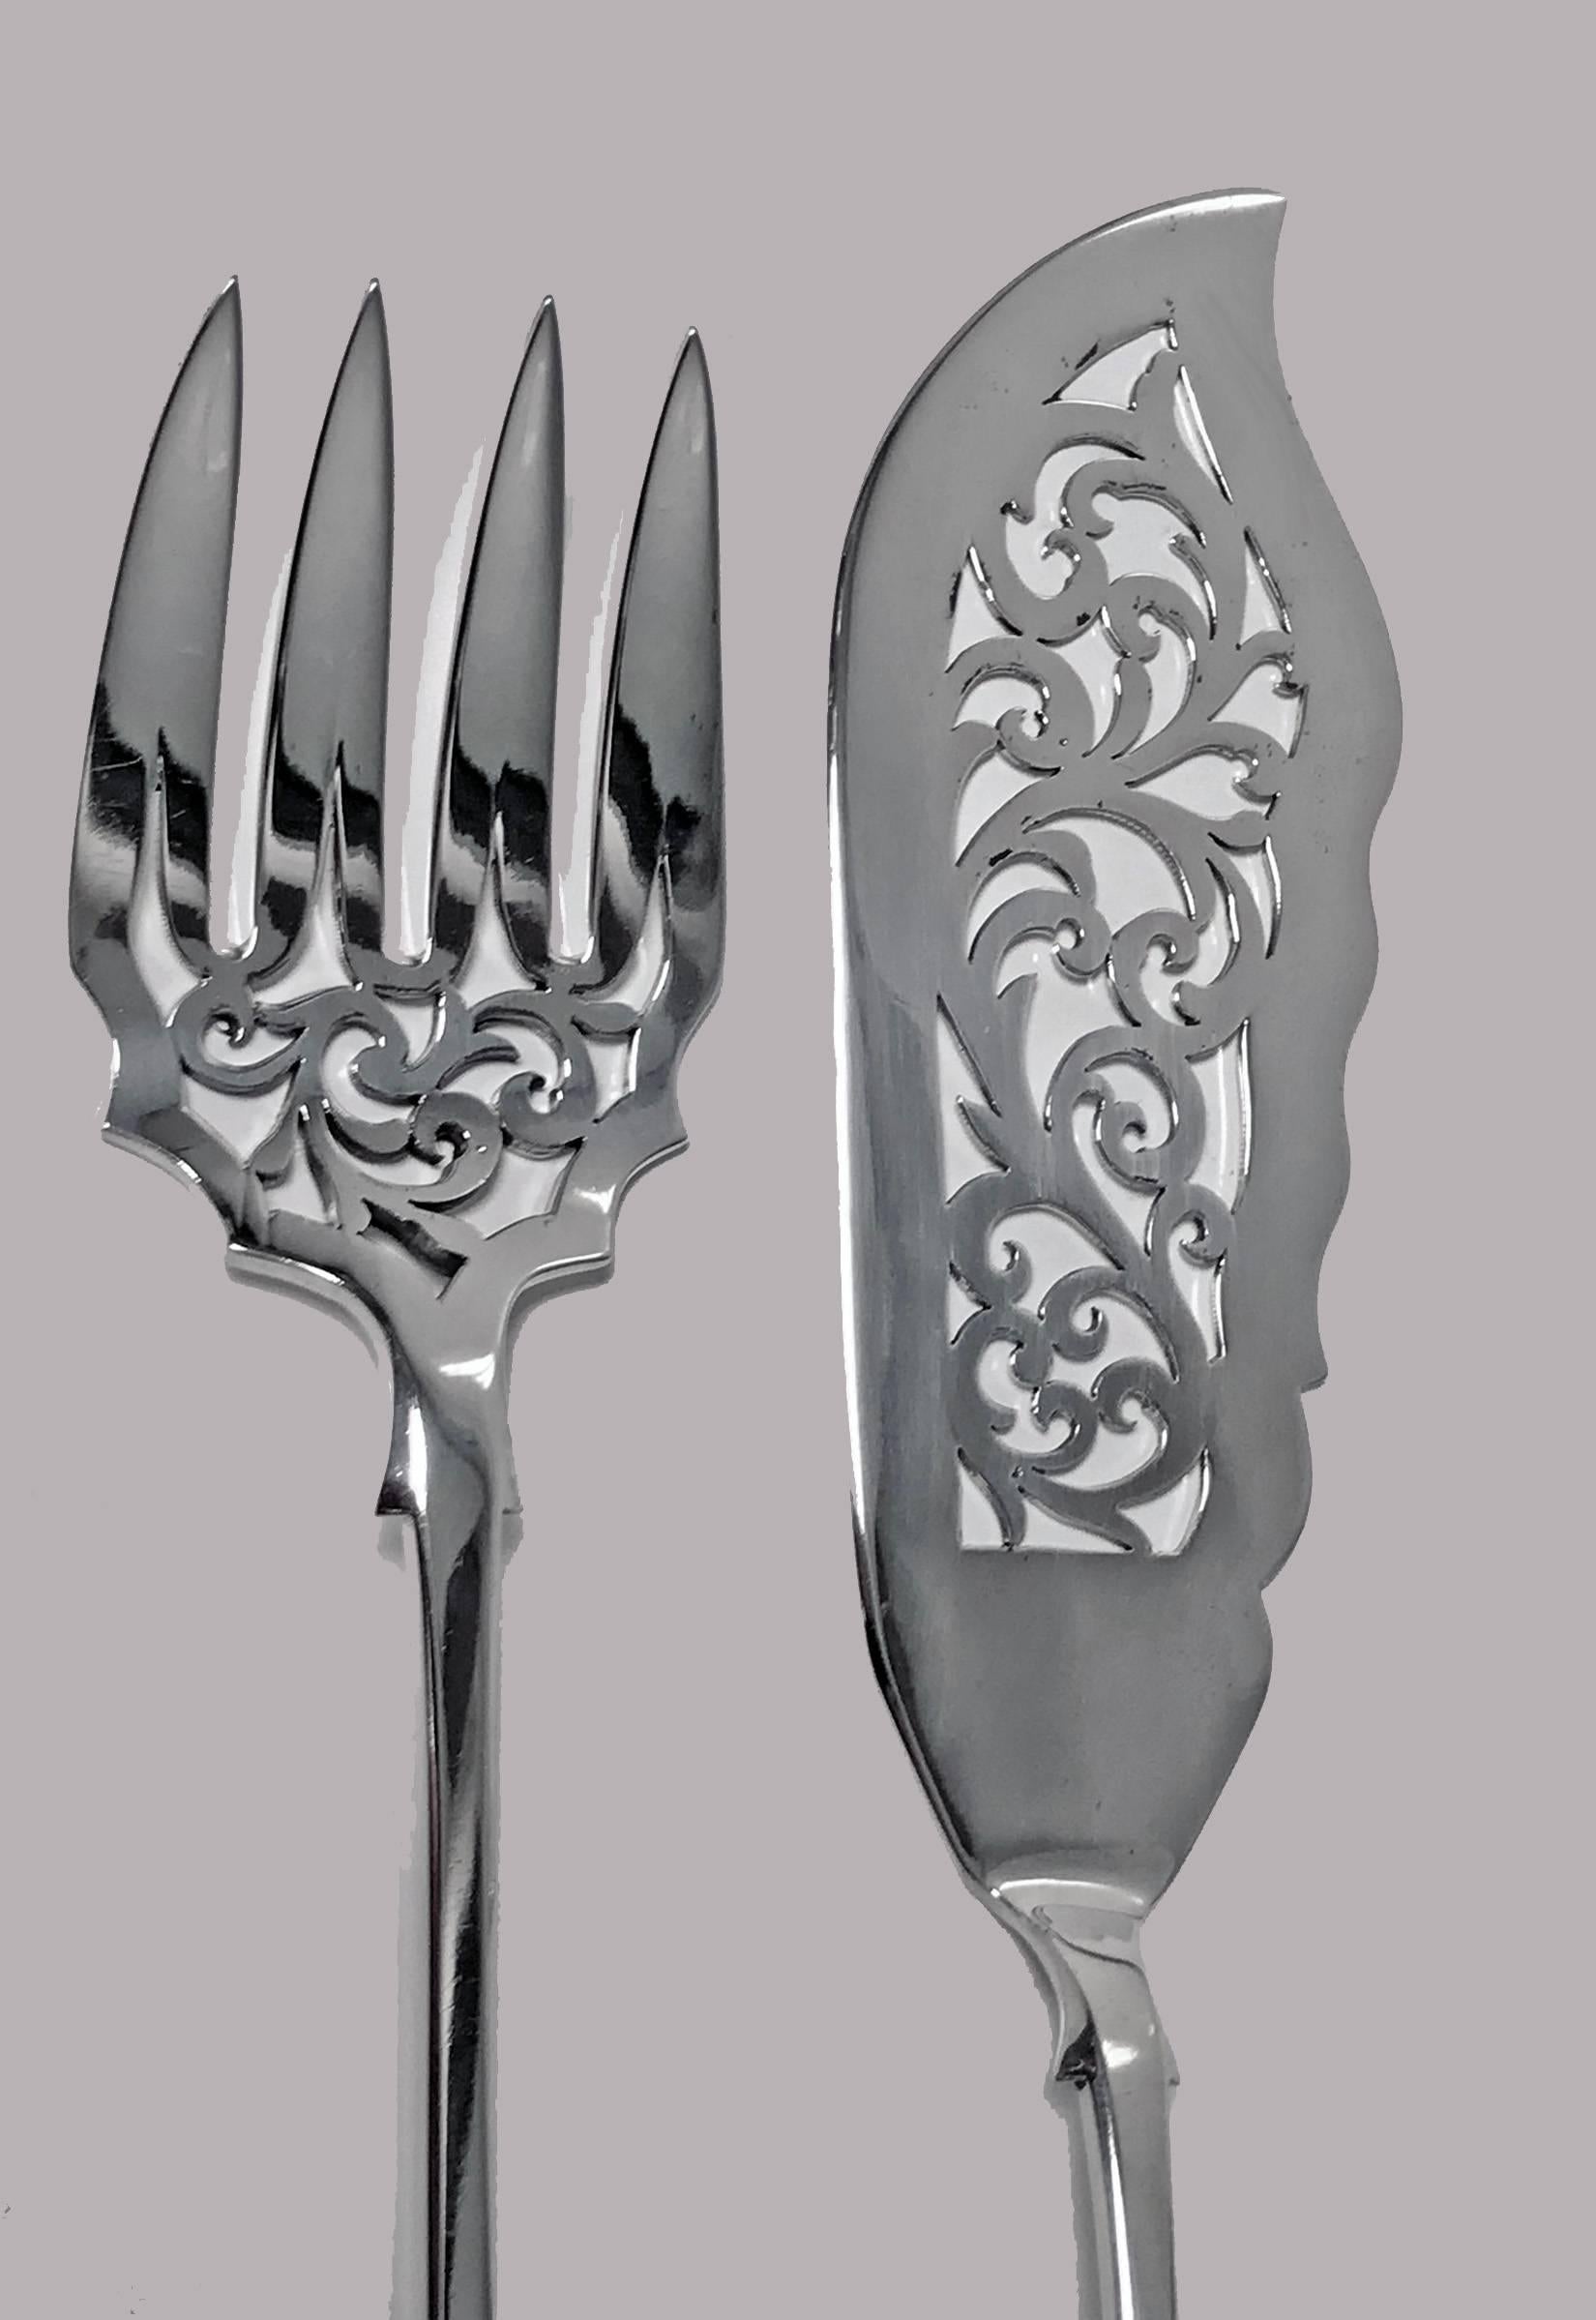 Pair of antique Victorian silver fish Servers, London 1854, Charles Boyton. Pierced foliate design blade and tines, plain fiddle handles. Lengths: - Fork- 9.75 inches. Knife: - 12.25 inches. Total weight: 234.36 grams.
 